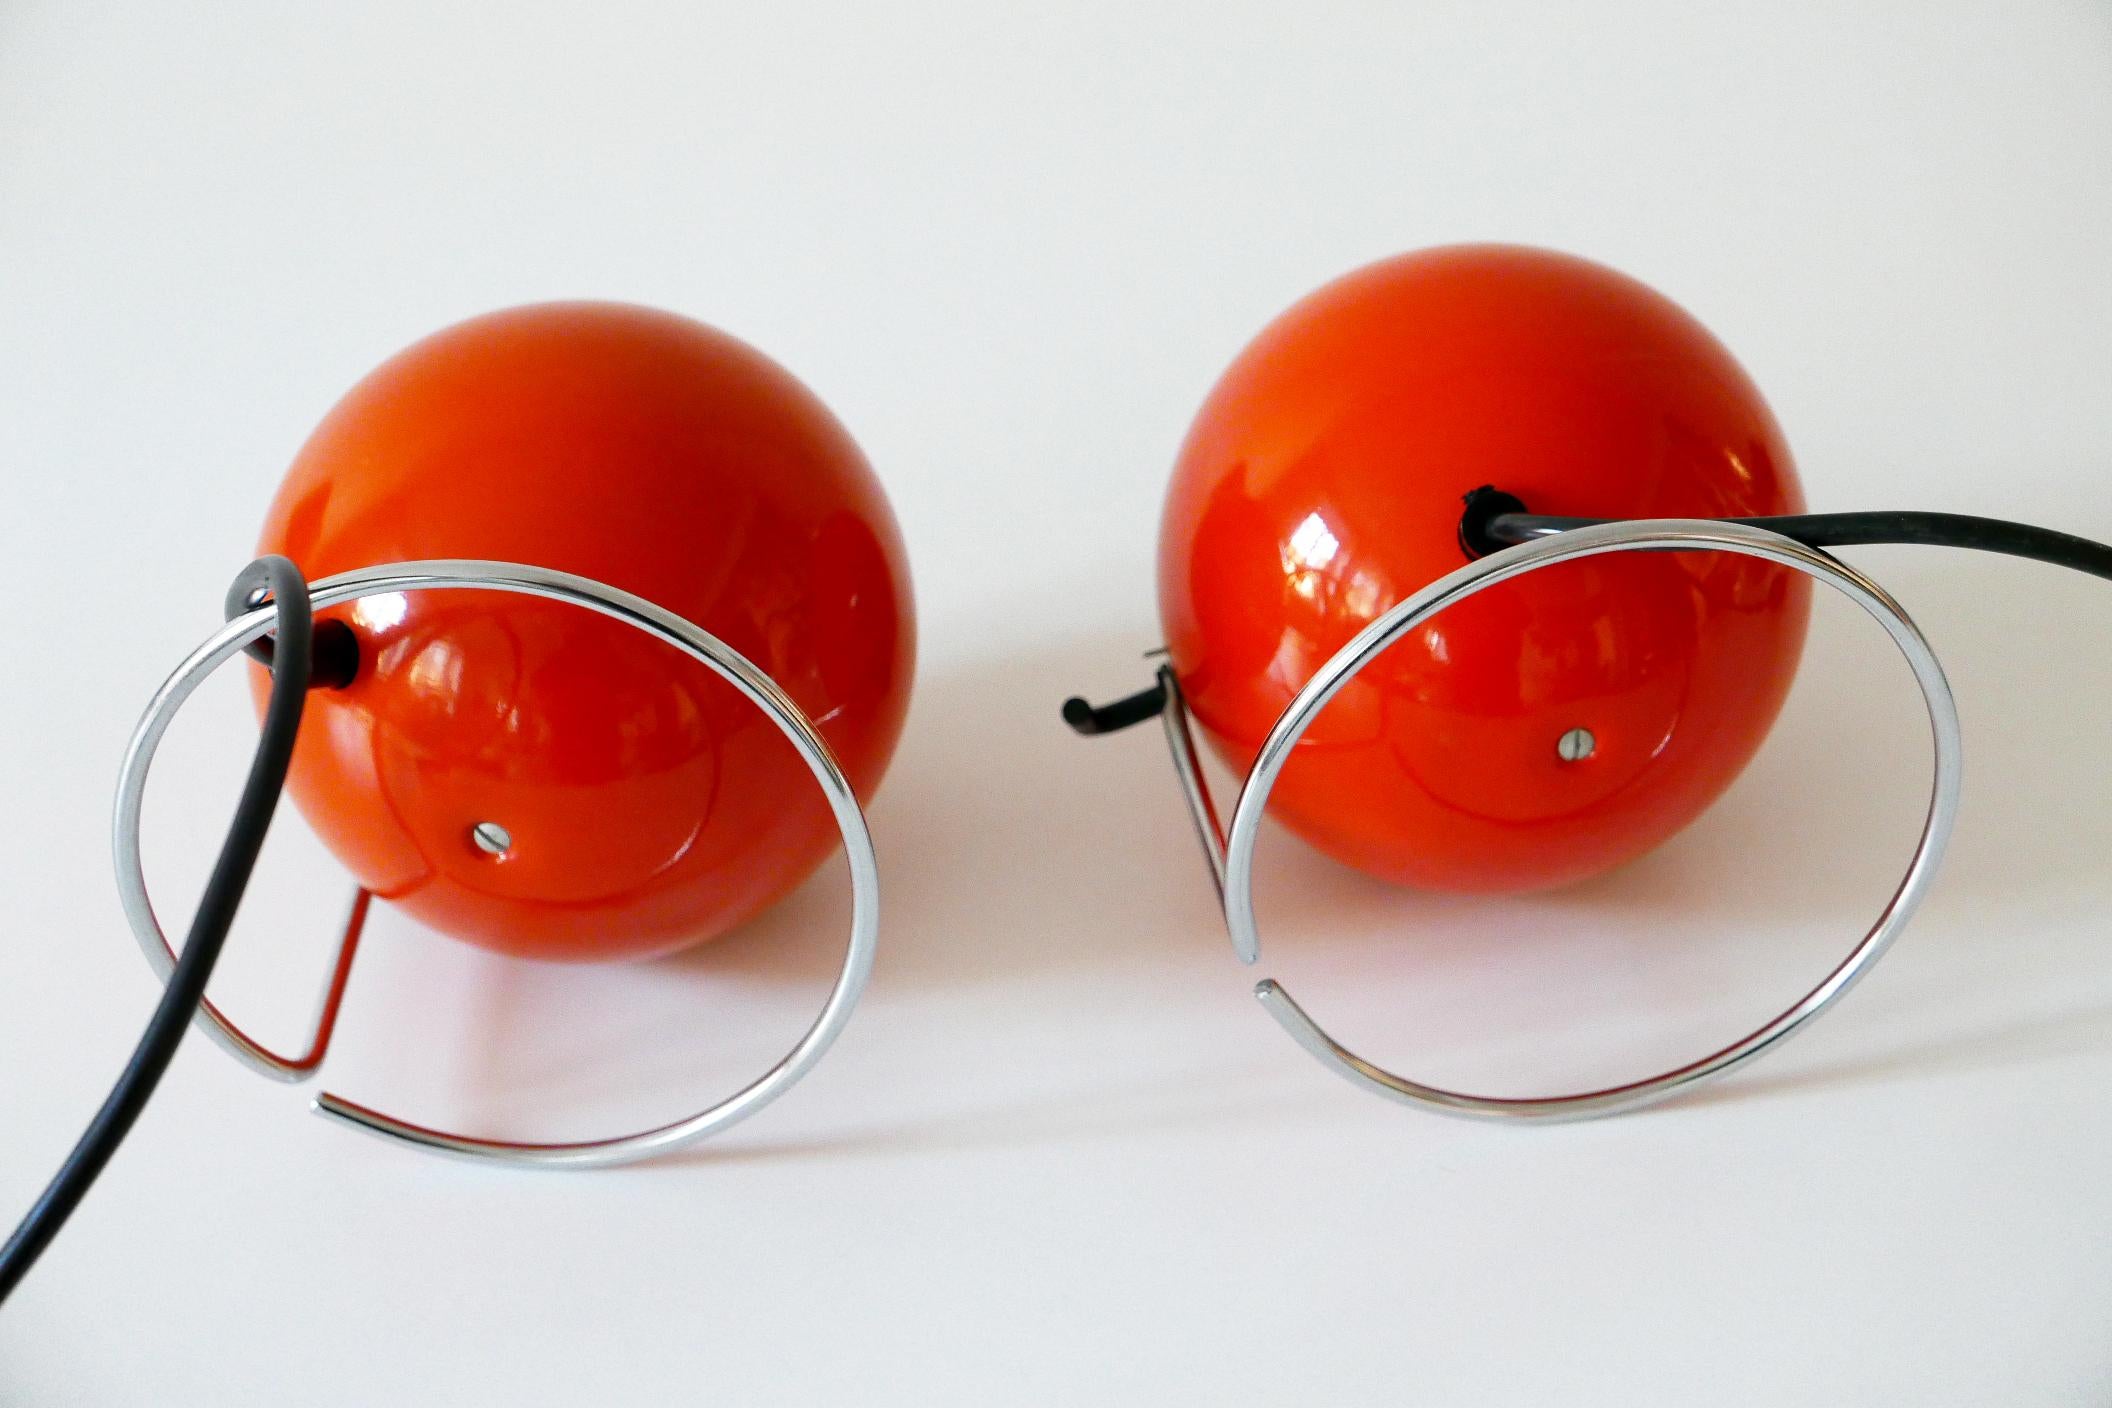 Set of Two Mid-Century Modern Metal 'Eye' Table Lamps, ERCO, 1960s-1970s Germany For Sale 11